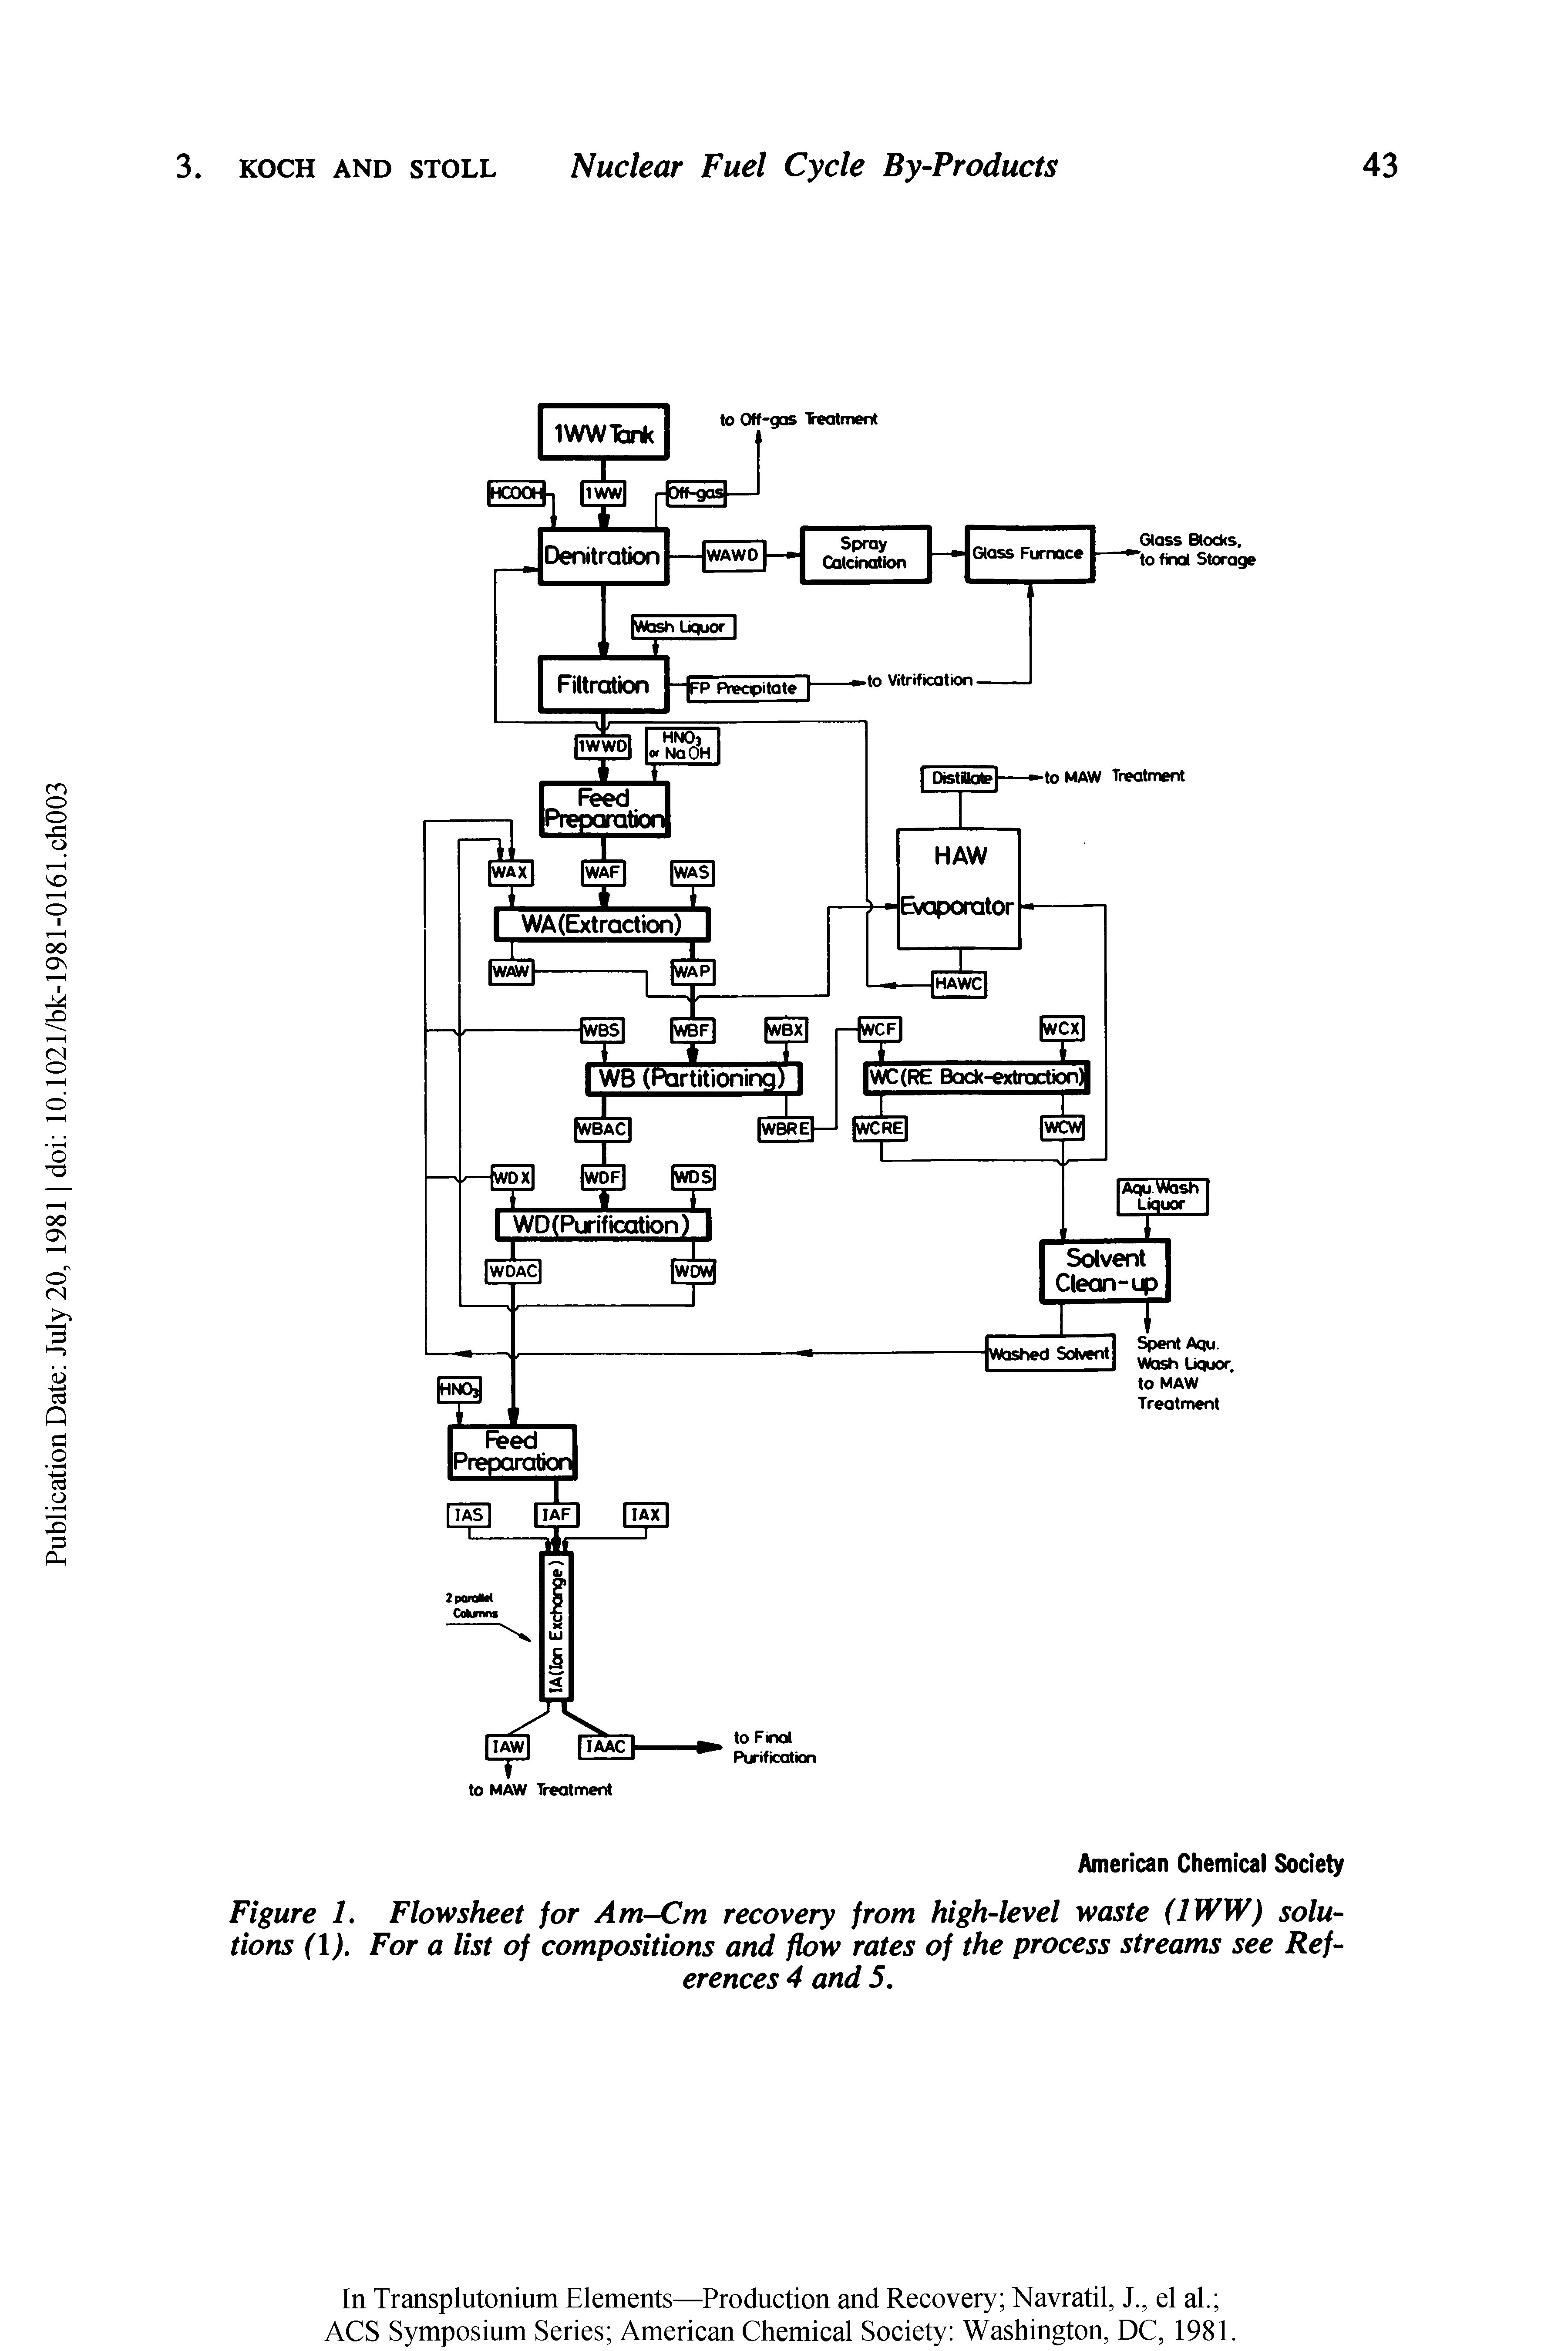 Figure 1. Flowsheet for Am-Cm recovery from high-level waste (1WW) solutions (1). For a list of compositions and flow rates of the process streams see References 4 and 5.